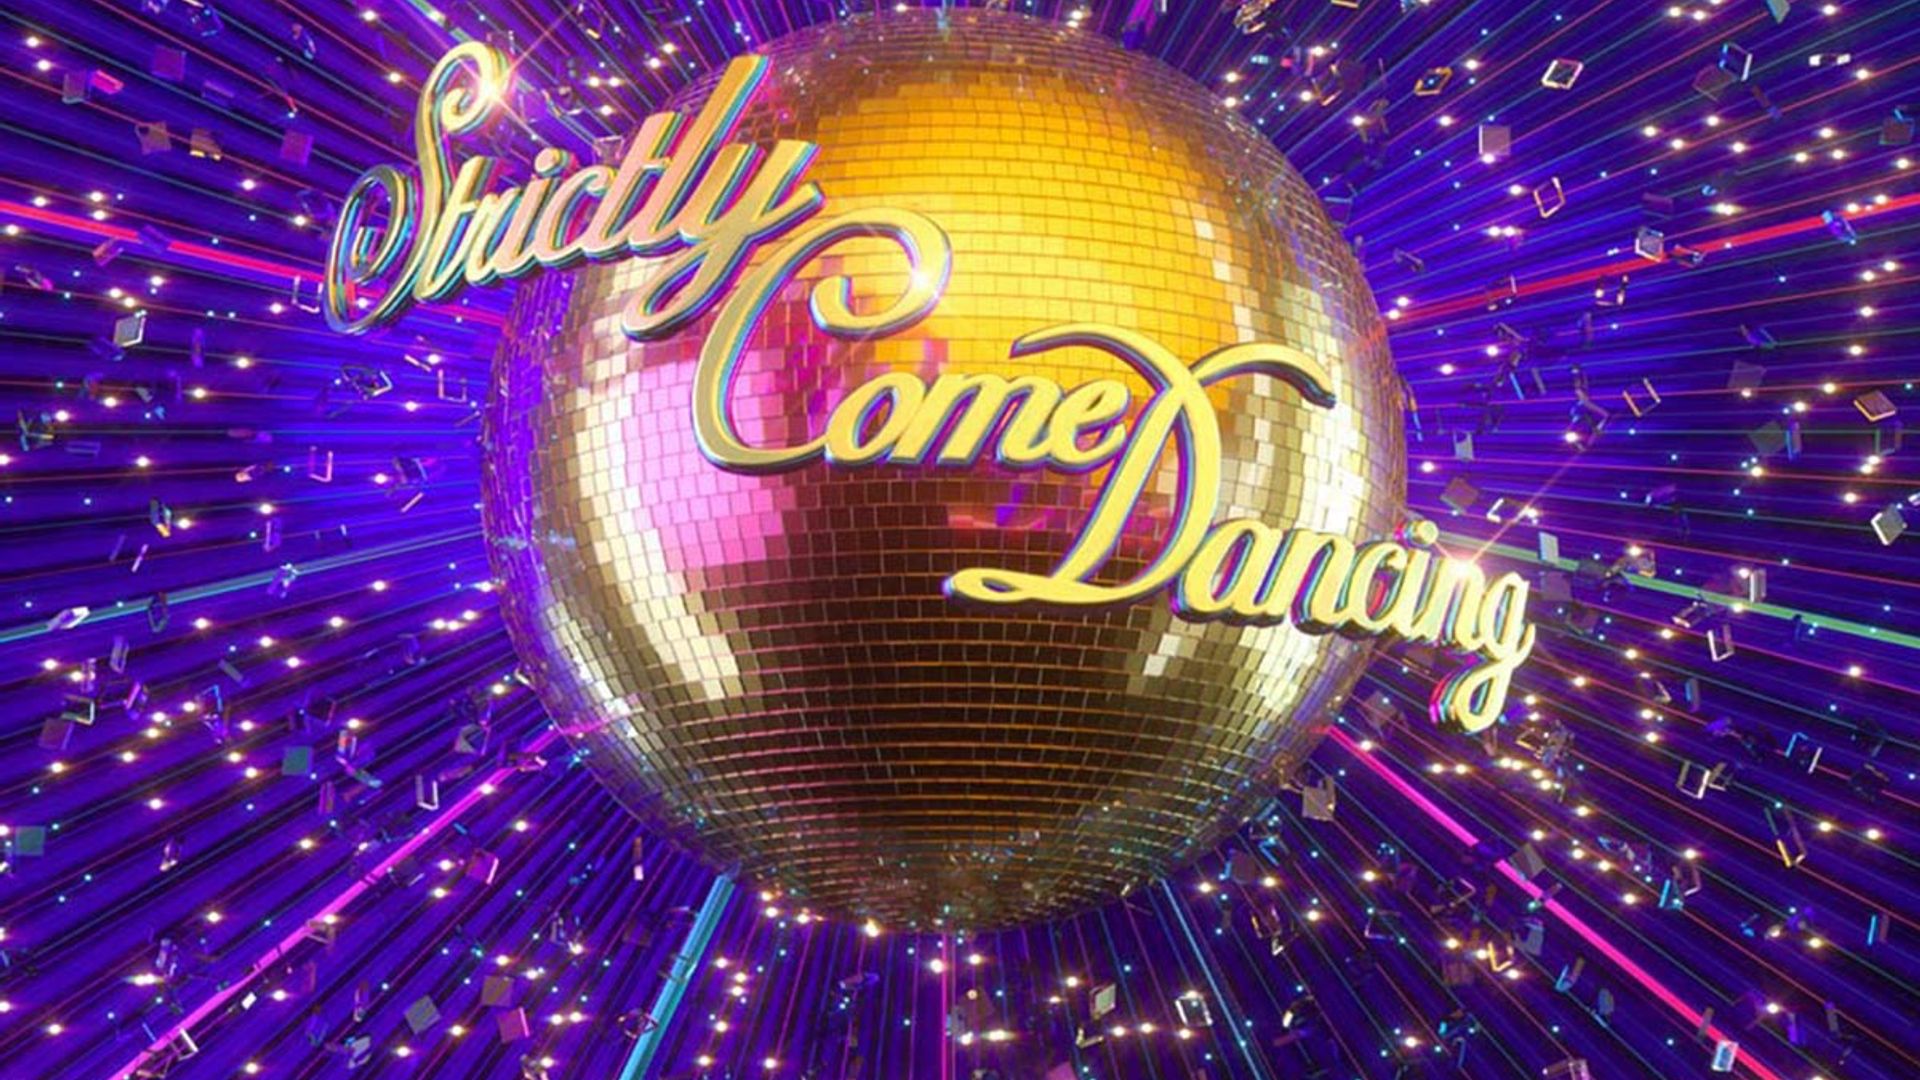 strictly come dancing logo